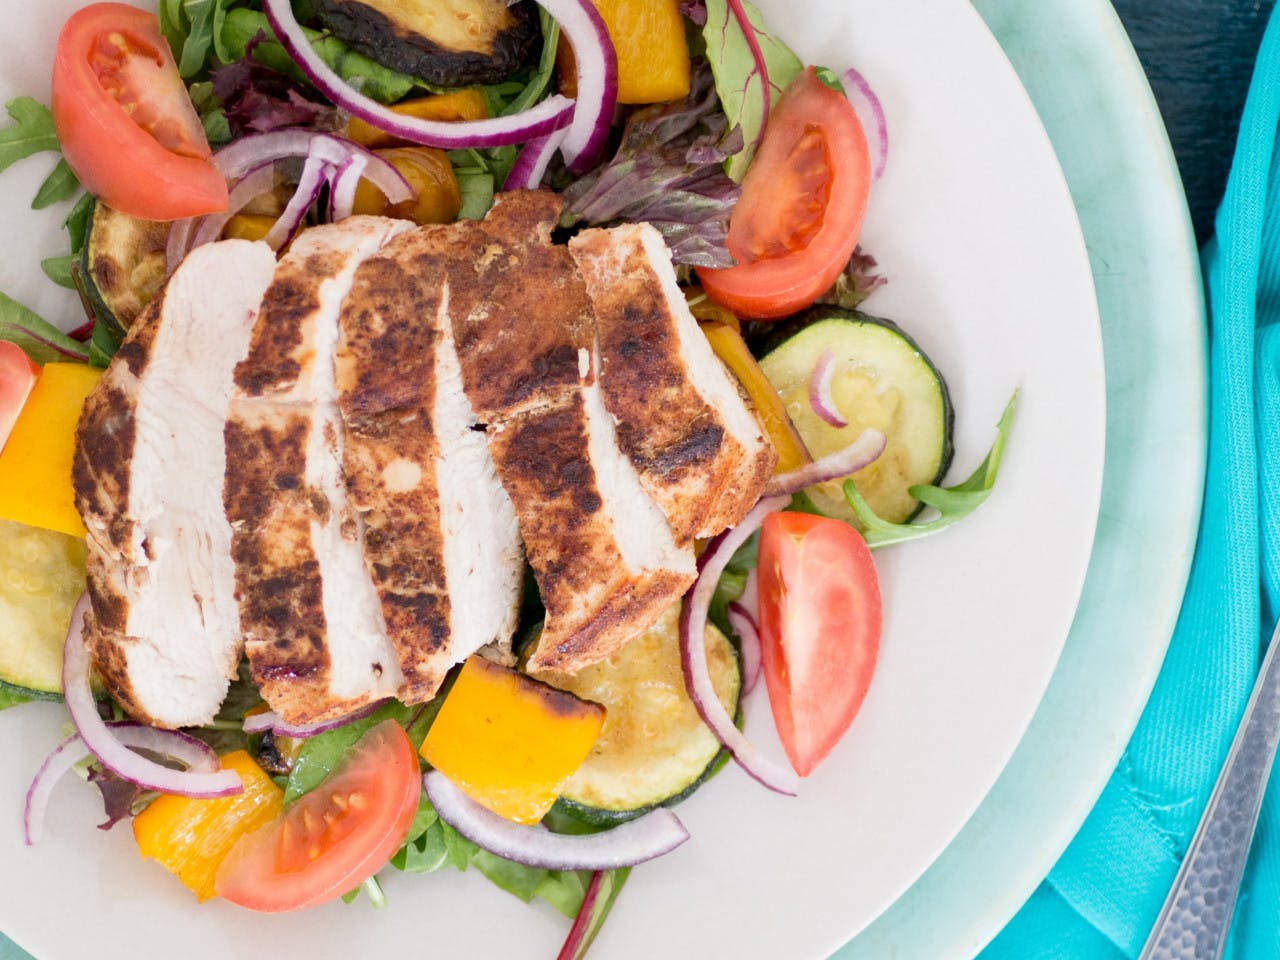 Salad with marinated chicken and grilled vegetables